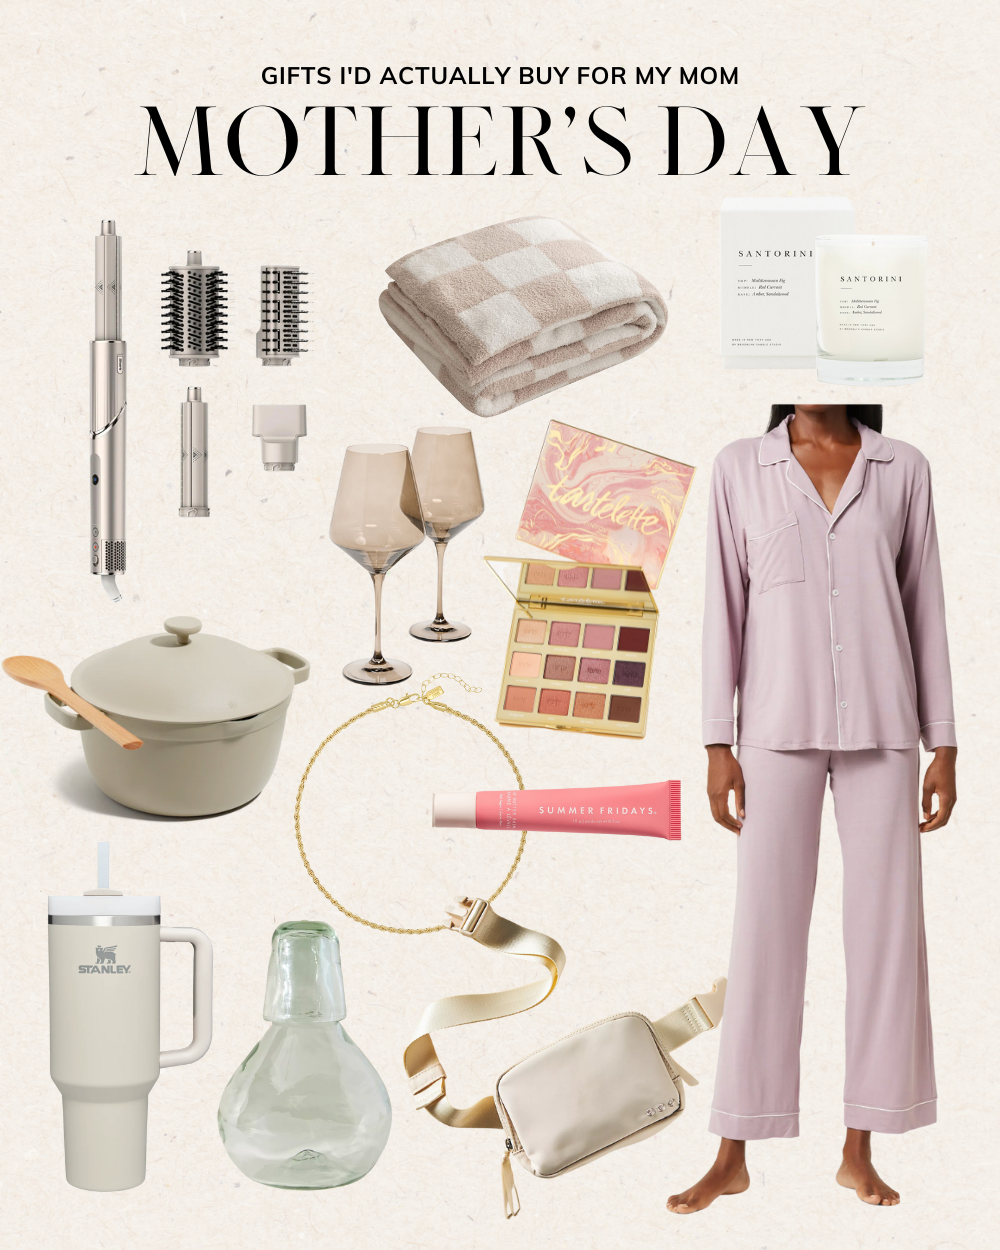 Practical Mother's Day Gifts